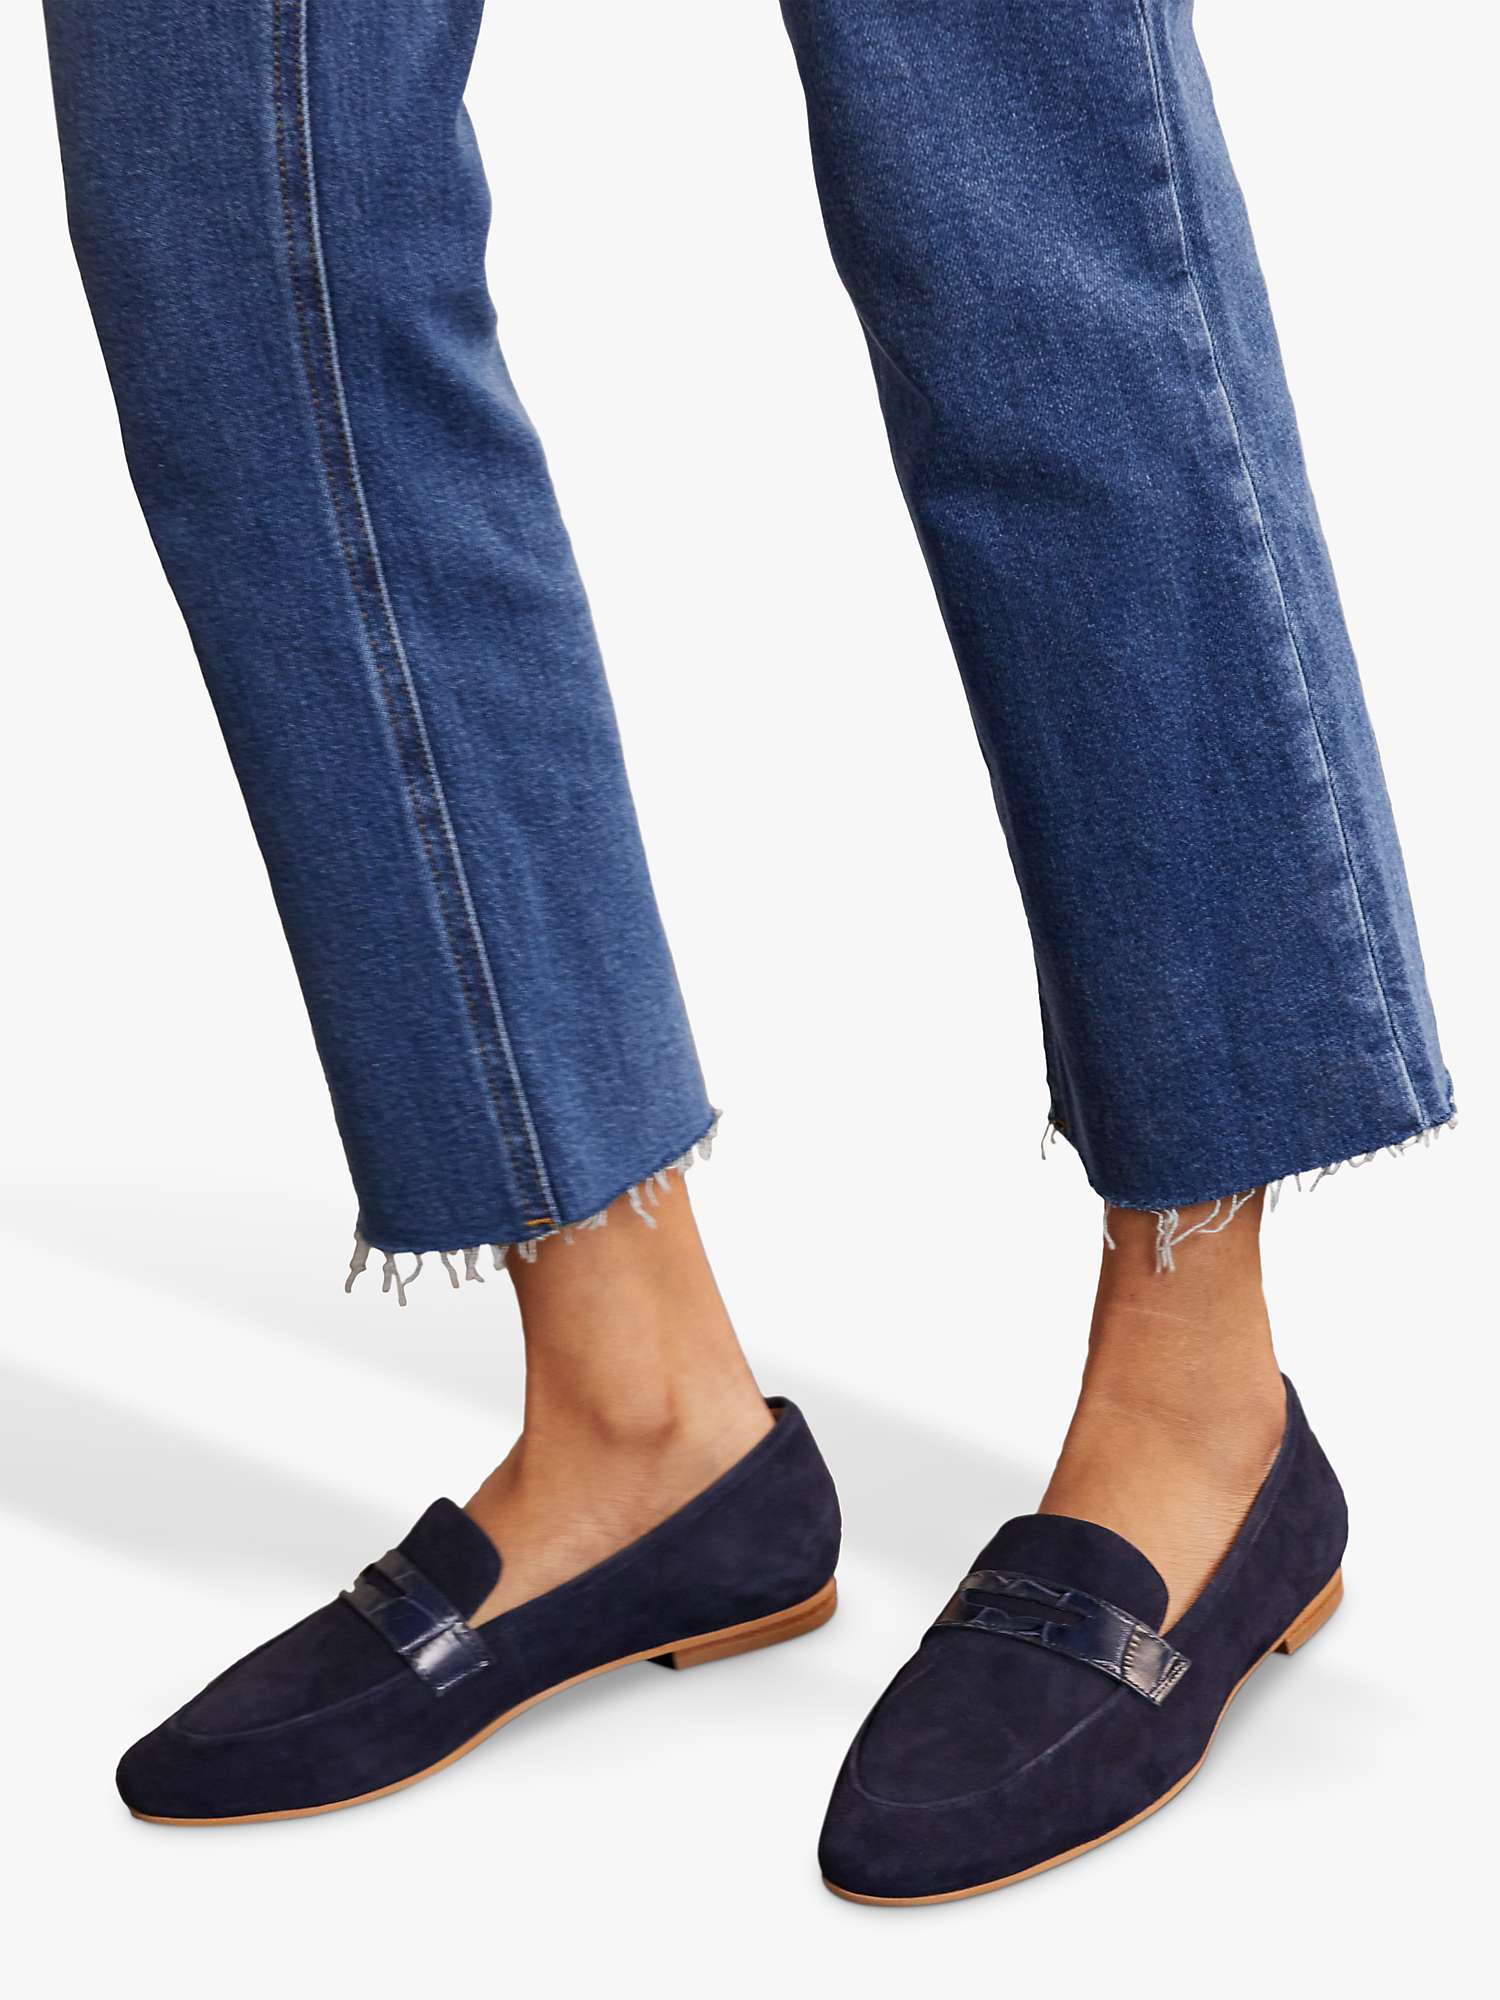 Buy Boden Relaxed Straight Jeans Online at johnlewis.com